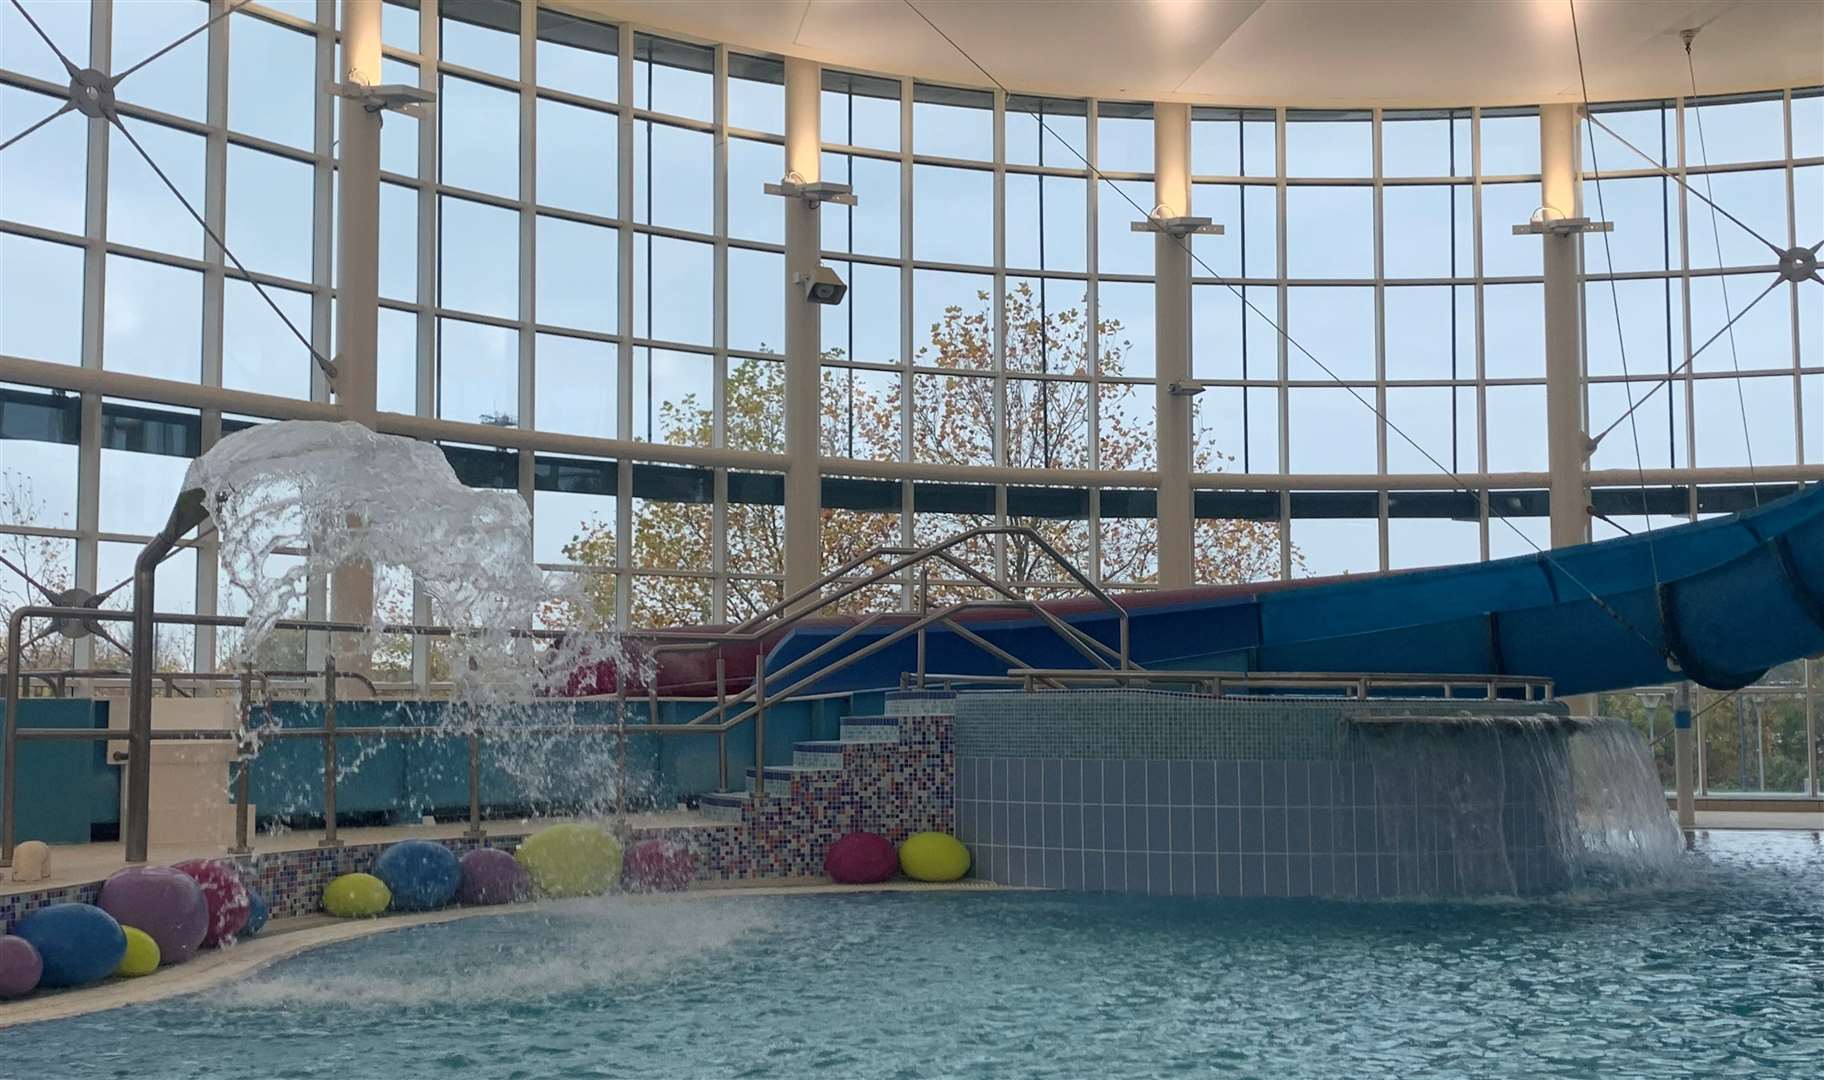 Leisure centre trusts say they are at risk of closing due to soaring energy costs after they were excluded from the government's new energy bills support scheme. Picture: Freedom Leisure